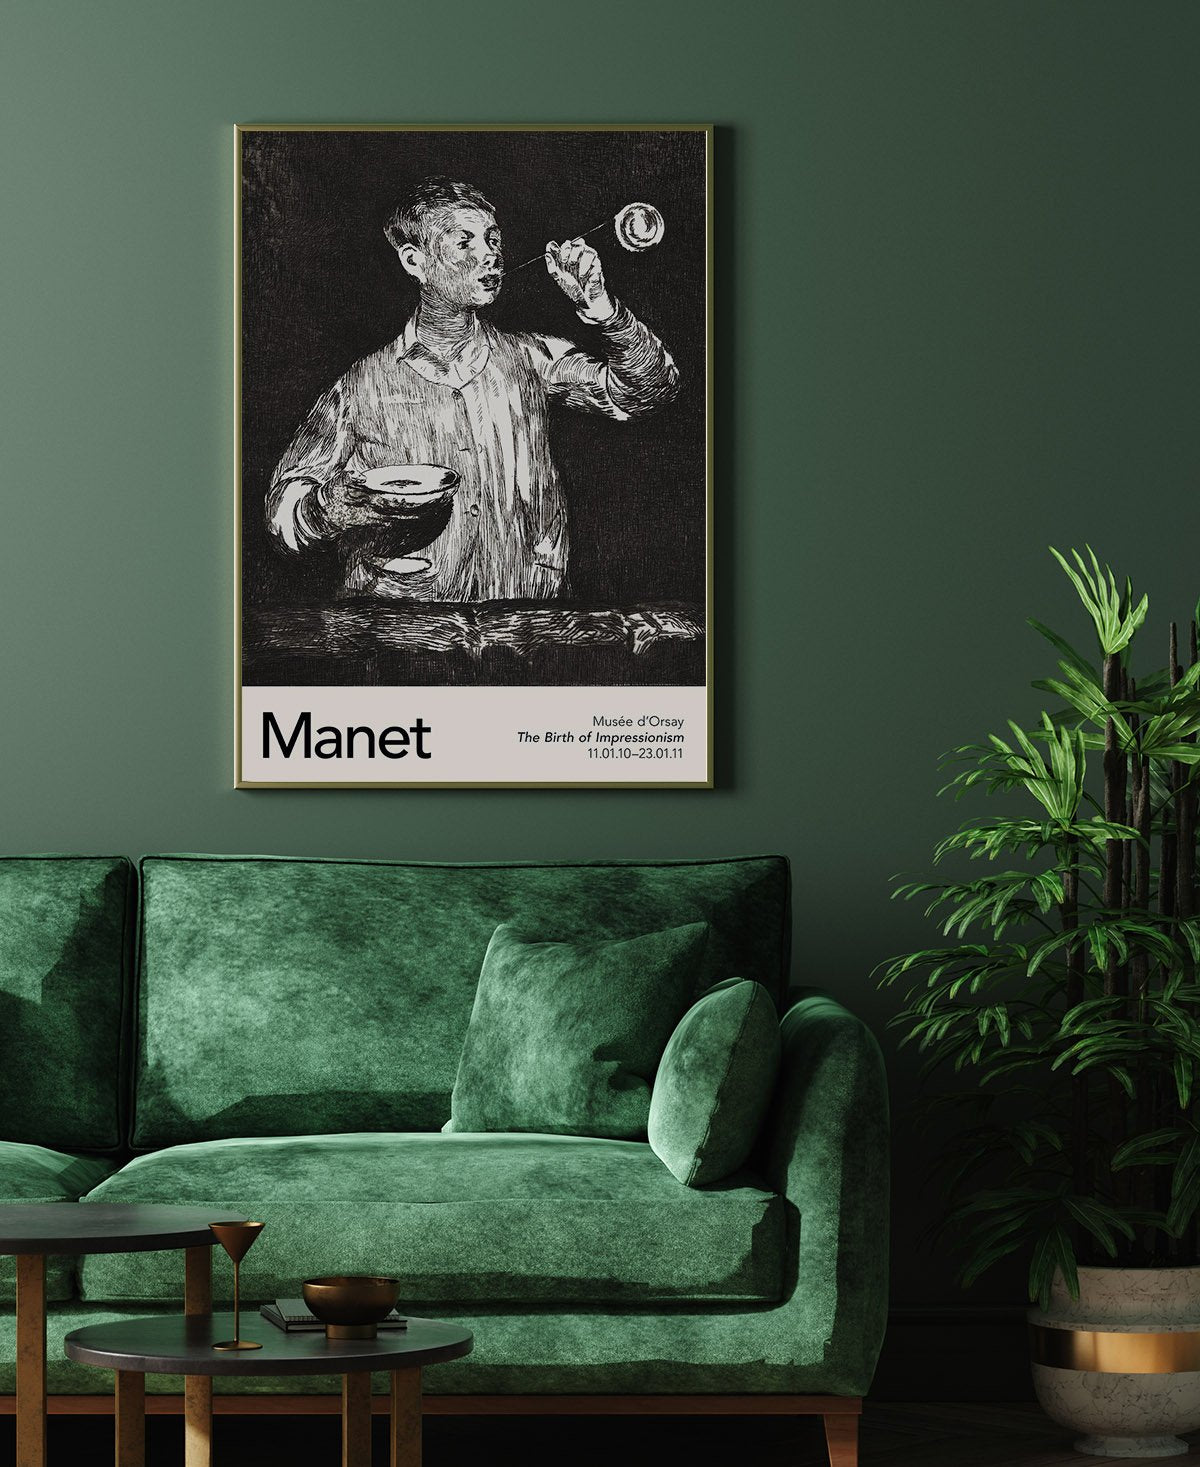 Boy Blowing Soap Bubbles by Manet Exhibition Poster